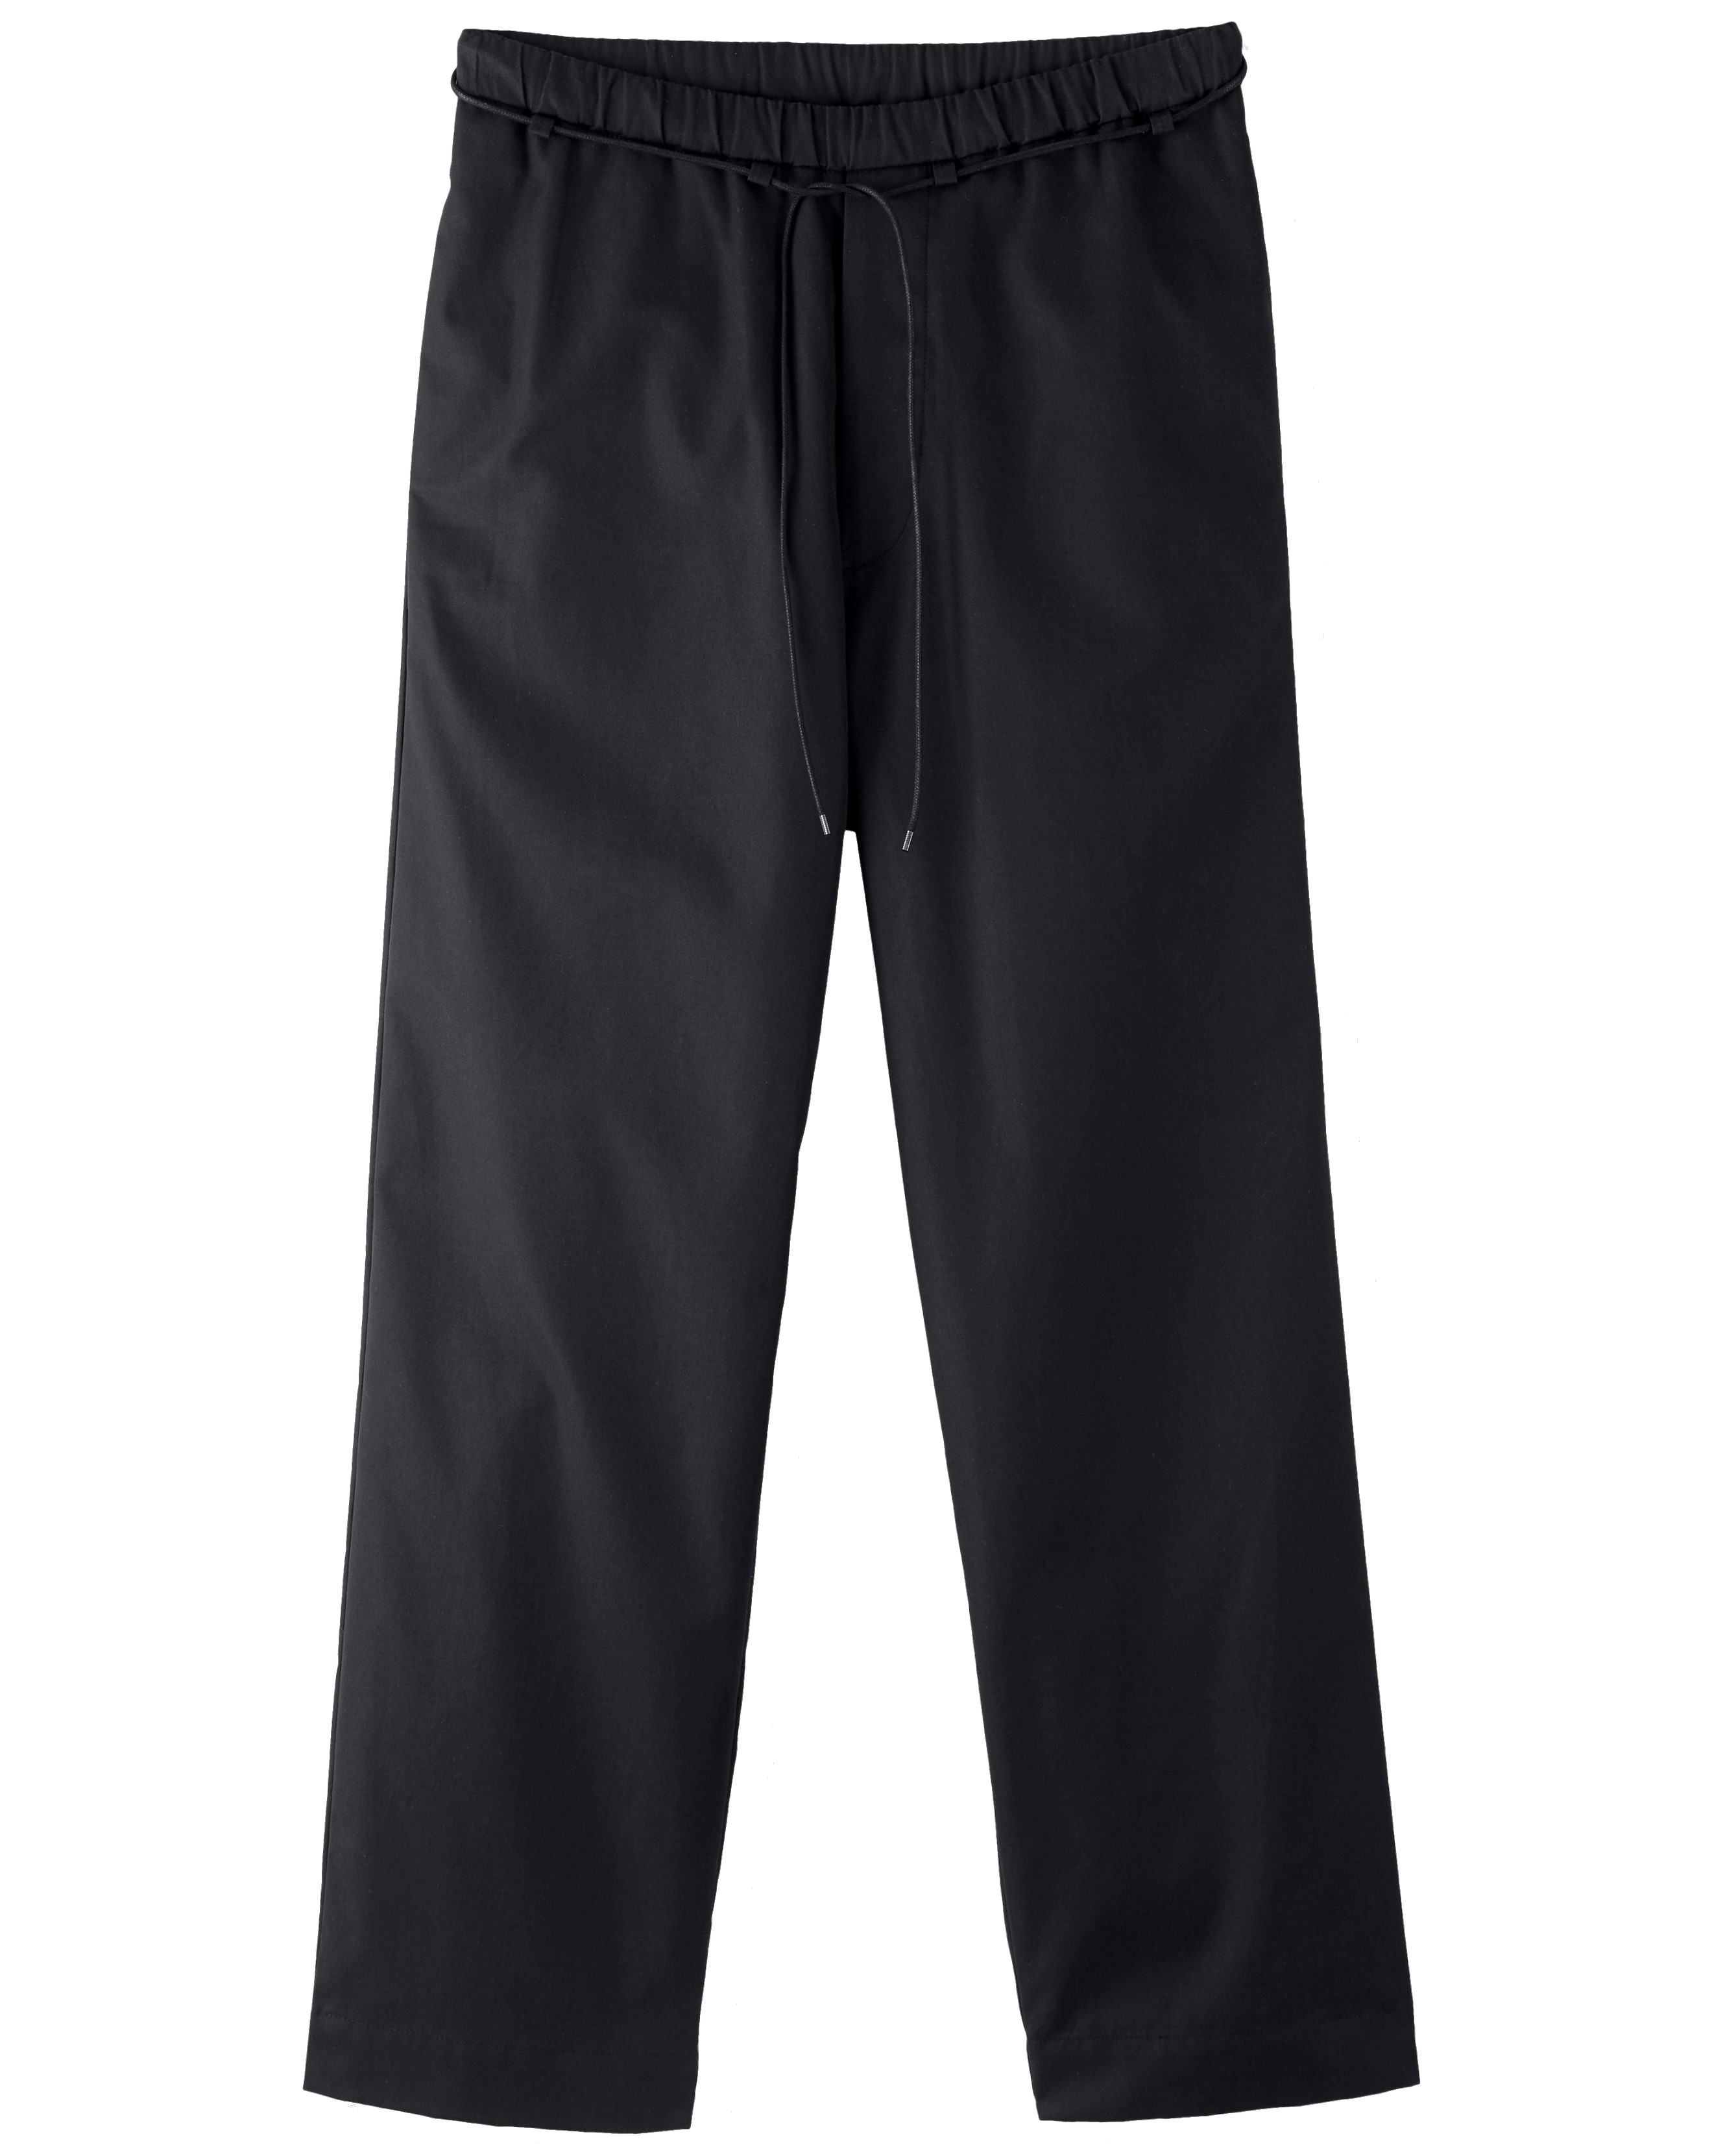 APPLIED ART FORMS Drawstring Pant in Black 52